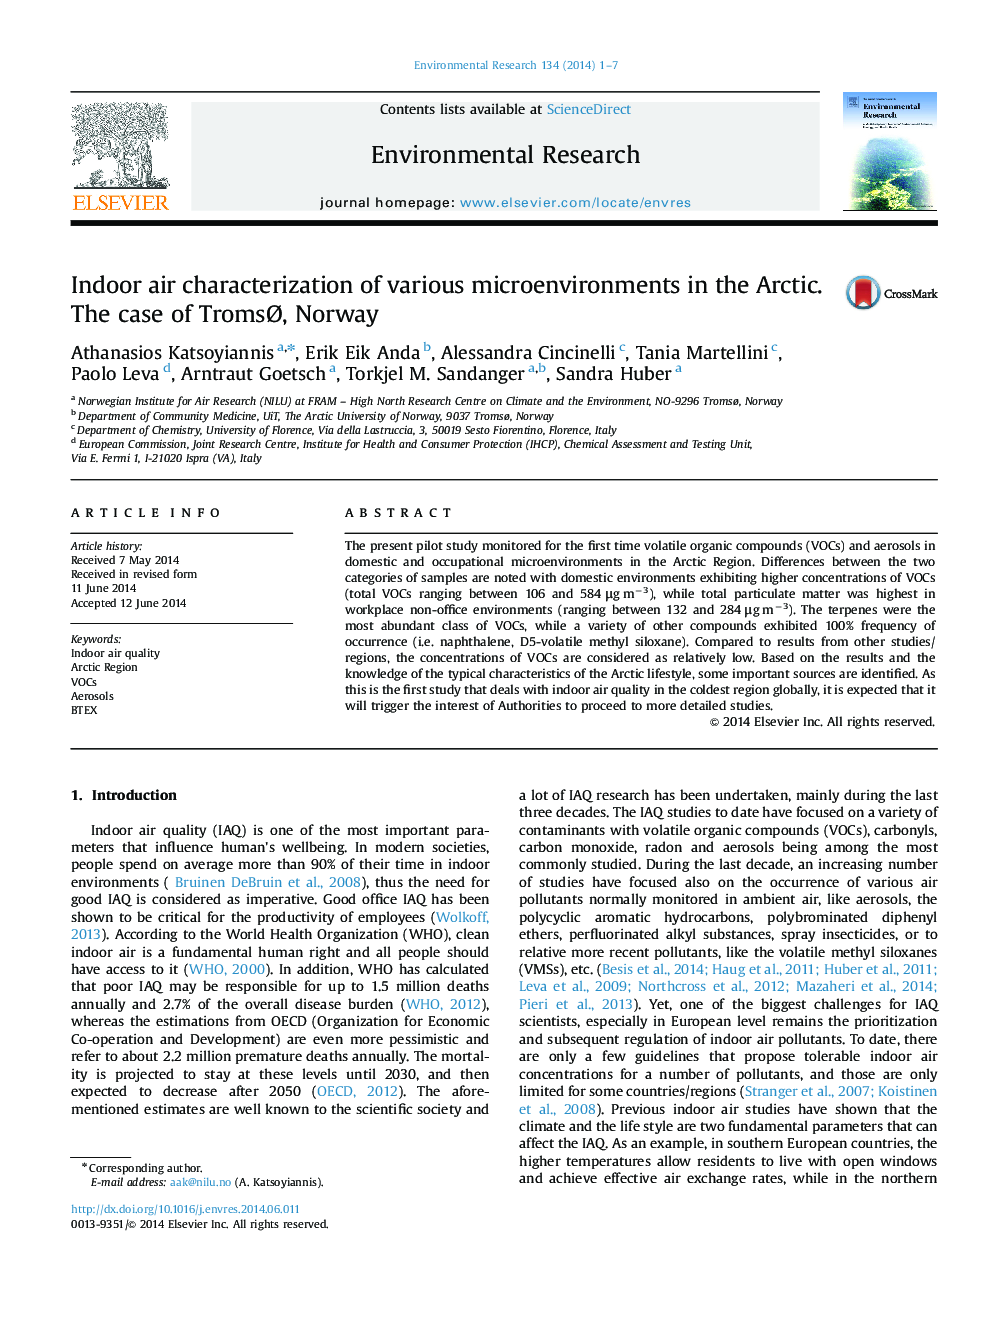 Indoor air characterization of various microenvironments in the Arctic. The case of TromsÃ, Norway